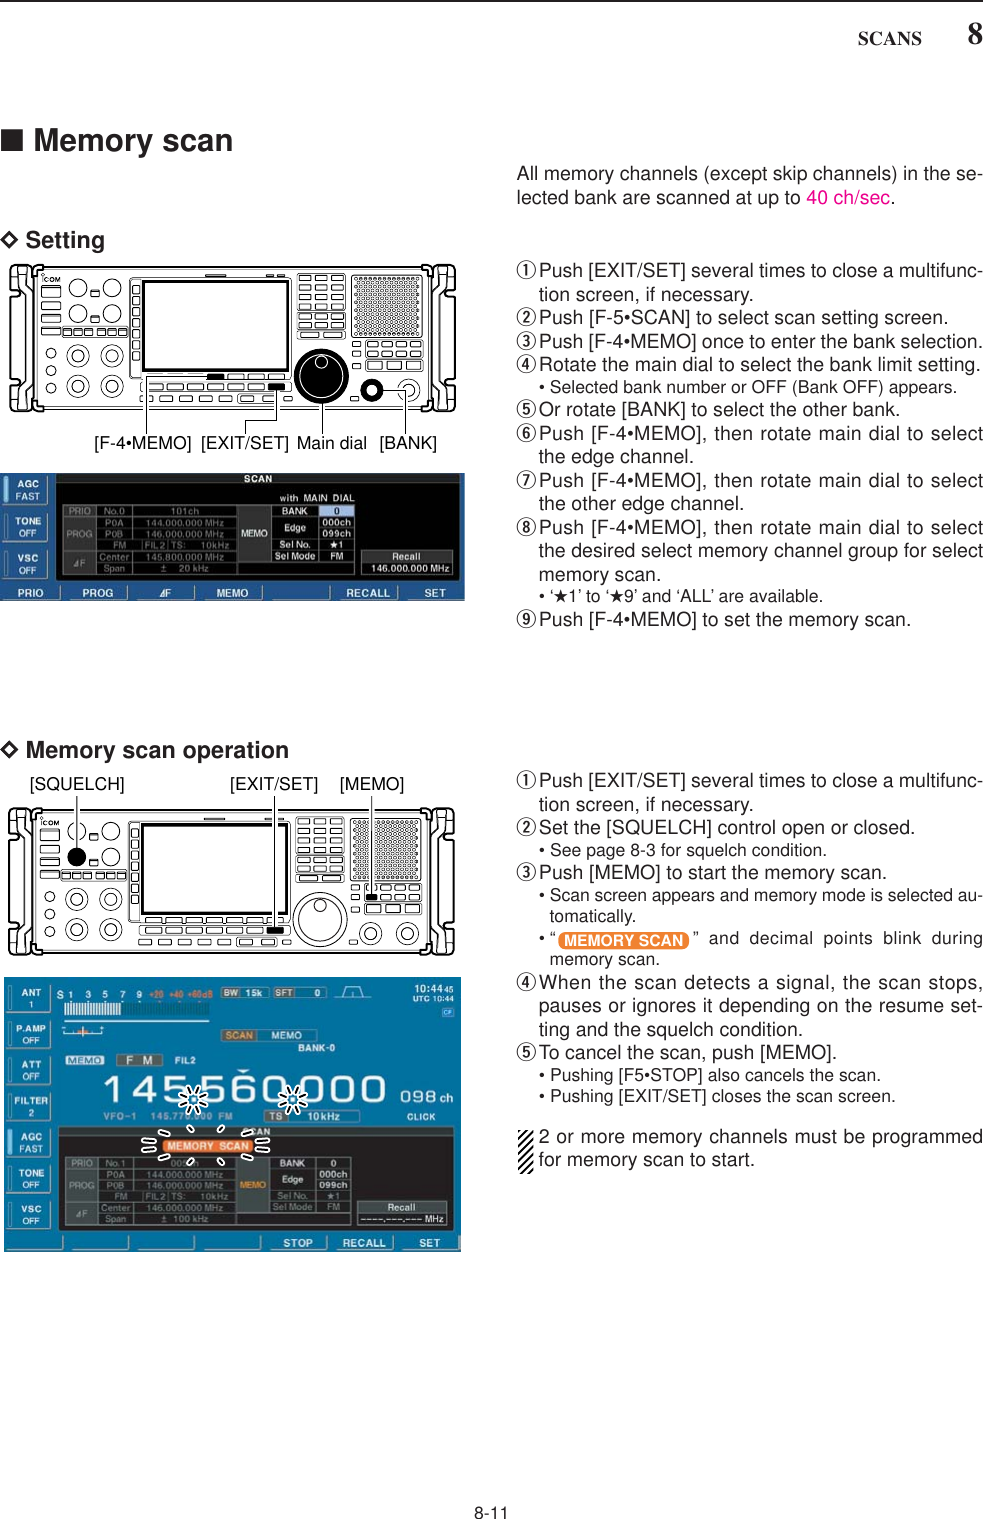 8-118SCANS■Memory scanAll memory channels (except skip channels) in the se-lected bank are scanned at up to 40 ch/sec.DSettingqPush [EXIT/SET] several times to close a multifunc-tion screen, if necessary.wPush [F-5•SCAN] to select scan setting screen.ePush [F-4•MEMO] once to enter the bank selection.rRotate the main dial to select the bank limit setting.• Selected bank number or OFF (Bank OFF) appears.tOr rotate [BANK] to select the other bank.yPush [F-4•MEMO], then rotate main dial to selectthe edge channel.uPush [F-4•MEMO], then rotate main dial to selectthe other edge channel.iPush [F-4•MEMO], then rotate main dial to selectthe desired select memory channel group for selectmemory scan.•‘★1’ to ‘★9’ and ‘ALL’ are available.oPush [F-4•MEMO] to set the memory scan.[F-4•MEMO] [EXIT/SET] Main dial [BANK]DMemory scan operationqPush [EXIT/SET] several times to close a multifunc-tion screen, if necessary.wSet the [SQUELCH] control open or closed.• See page 8-3 for squelch condition.ePush [MEMO] to start the memory scan.• Scan screen appears and memory mode is selected au-tomatically.• “ ” and decimal points blink duringmemory scan.rWhen the scan detects a signal, the scan stops,pauses or ignores it depending on the resume set-ting and the squelch condition.tTo cancel the scan, push [MEMO].• Pushing [F5•STOP] also cancels the scan.• Pushing [EXIT/SET] closes the scan screen.2 or more memory channels must be programmedfor memory scan to start.MEMORY SCAN[EXIT/SET] [MEMO][SQUELCH]